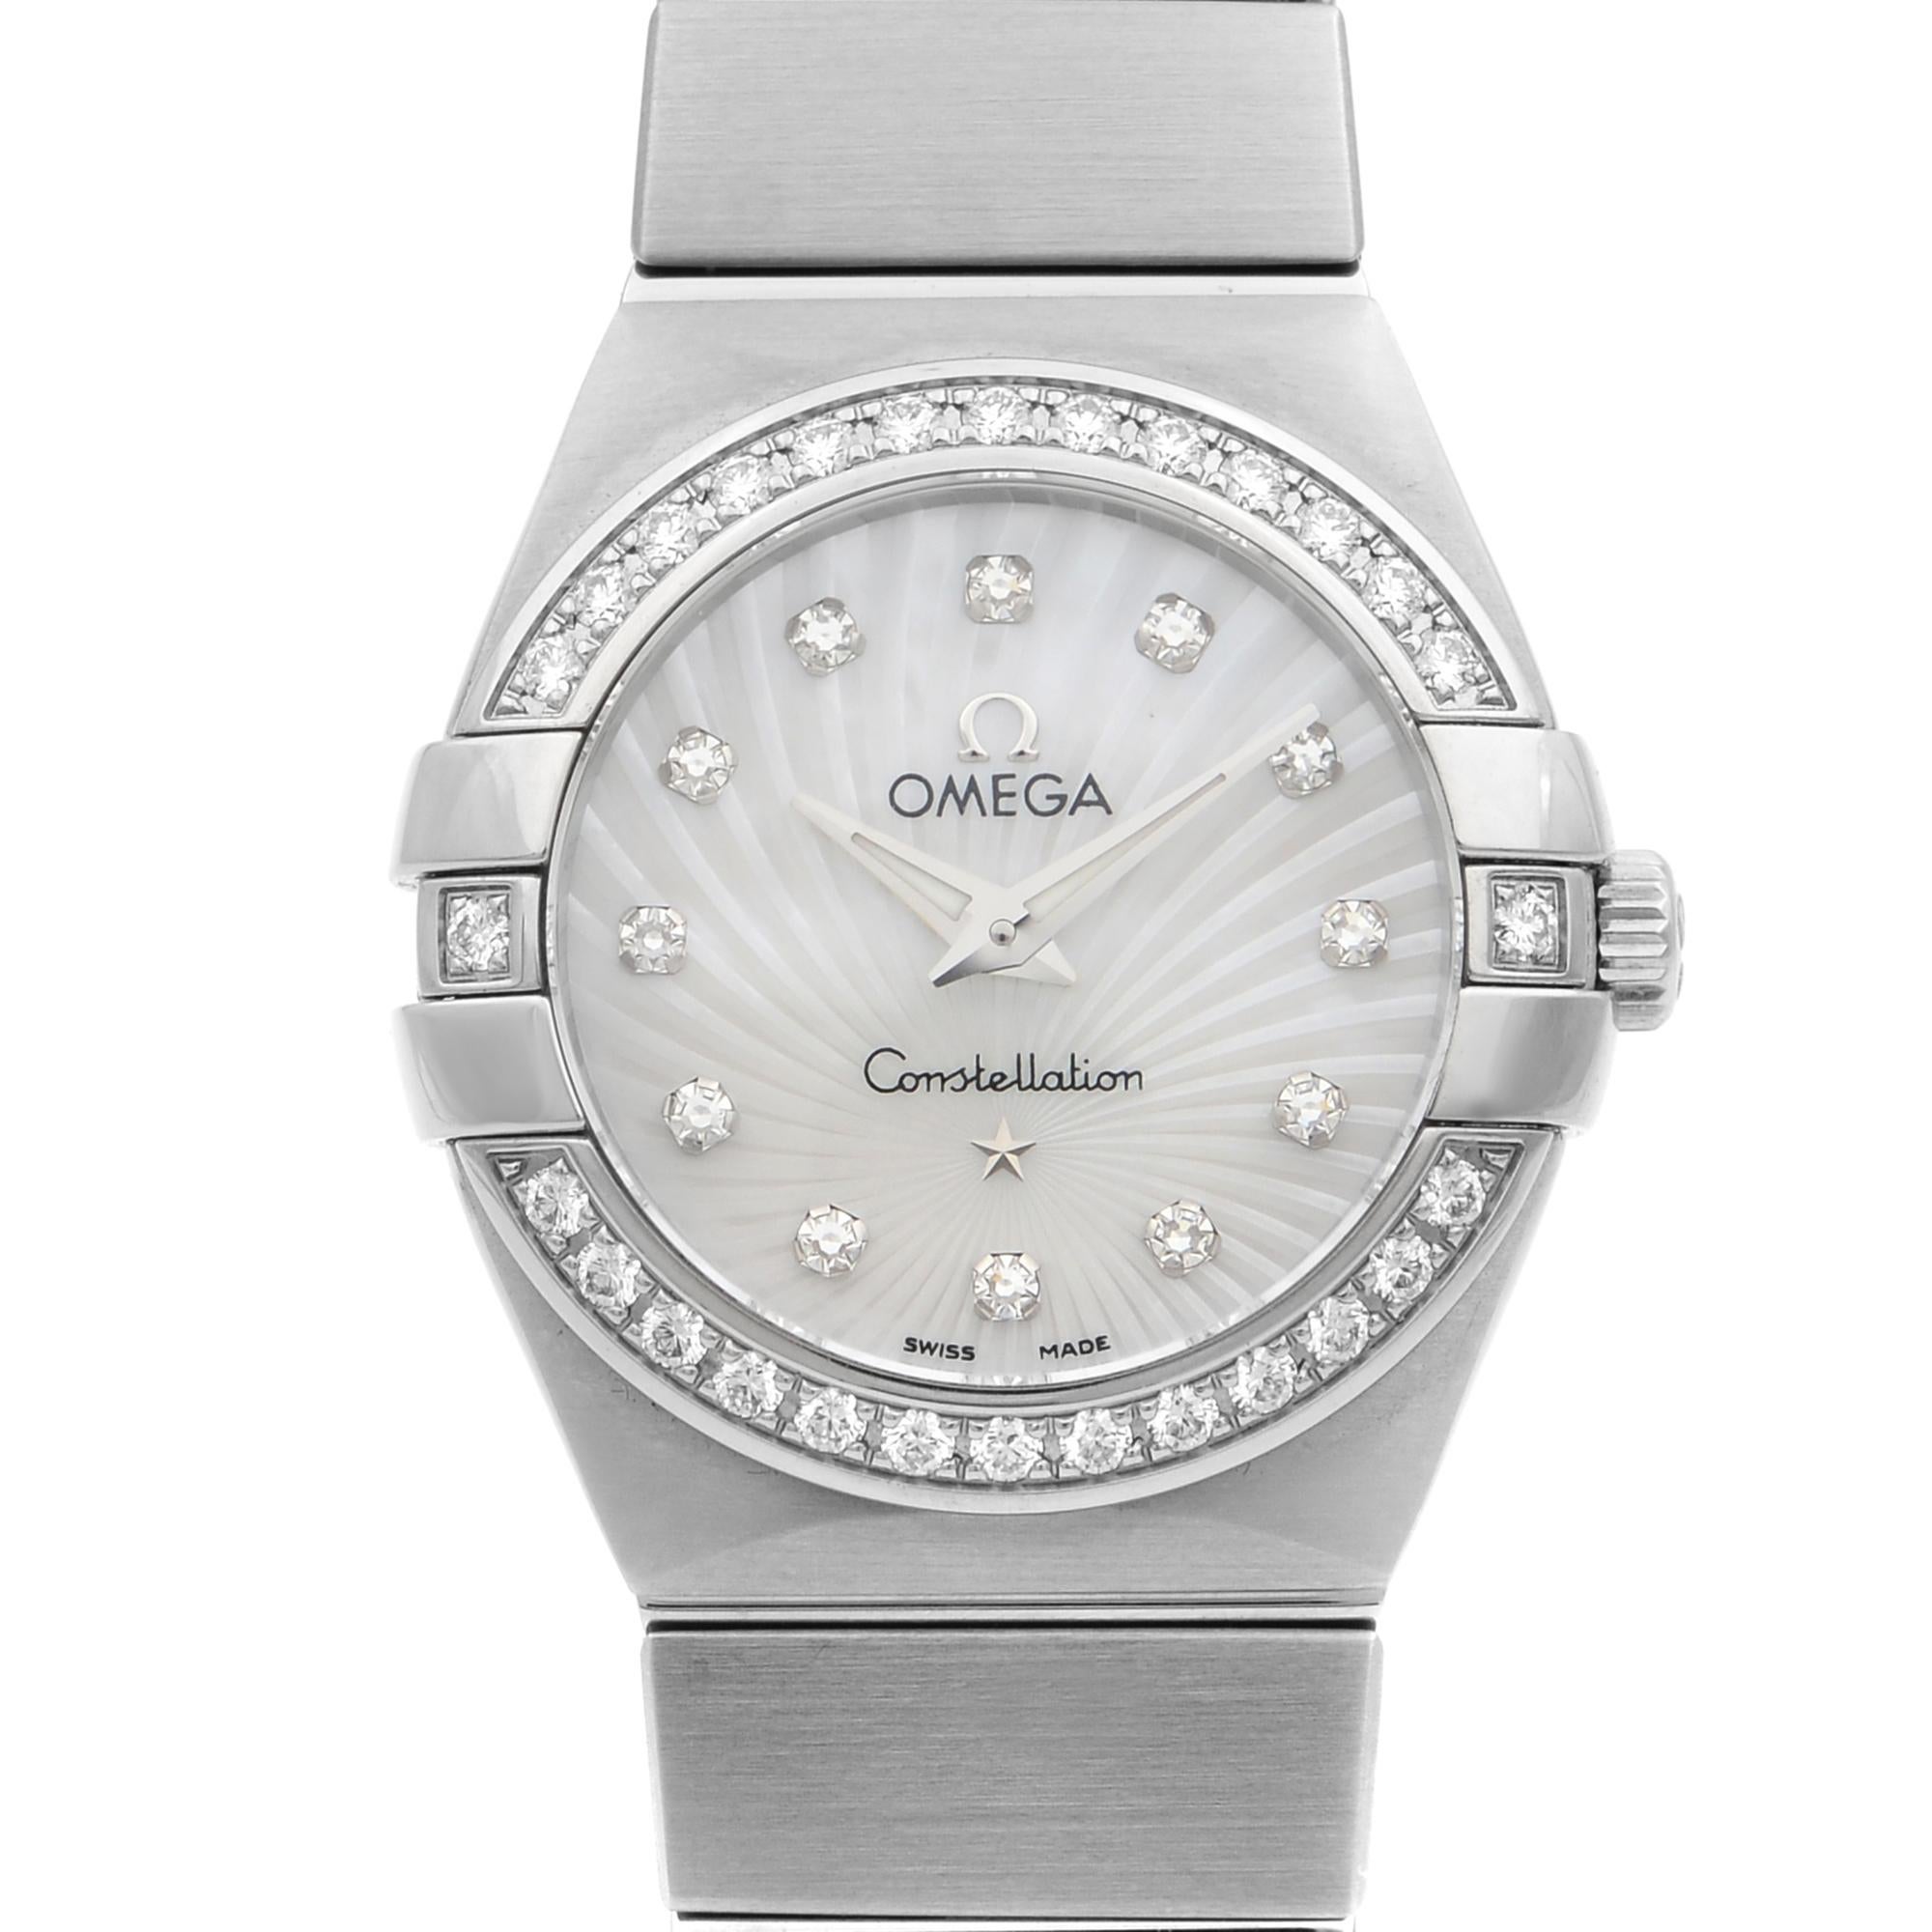 Display Model Omega Constellation Steel White MOP Dial Quartz Ladies Watch 123.15.24.60.55.002. This Beautiful Timepiece Features: Stainless Steel Case and Bracelet, Fixed Stainless Steel Bezel Set with Diamonds, White Mother-of-Pearl Dial with